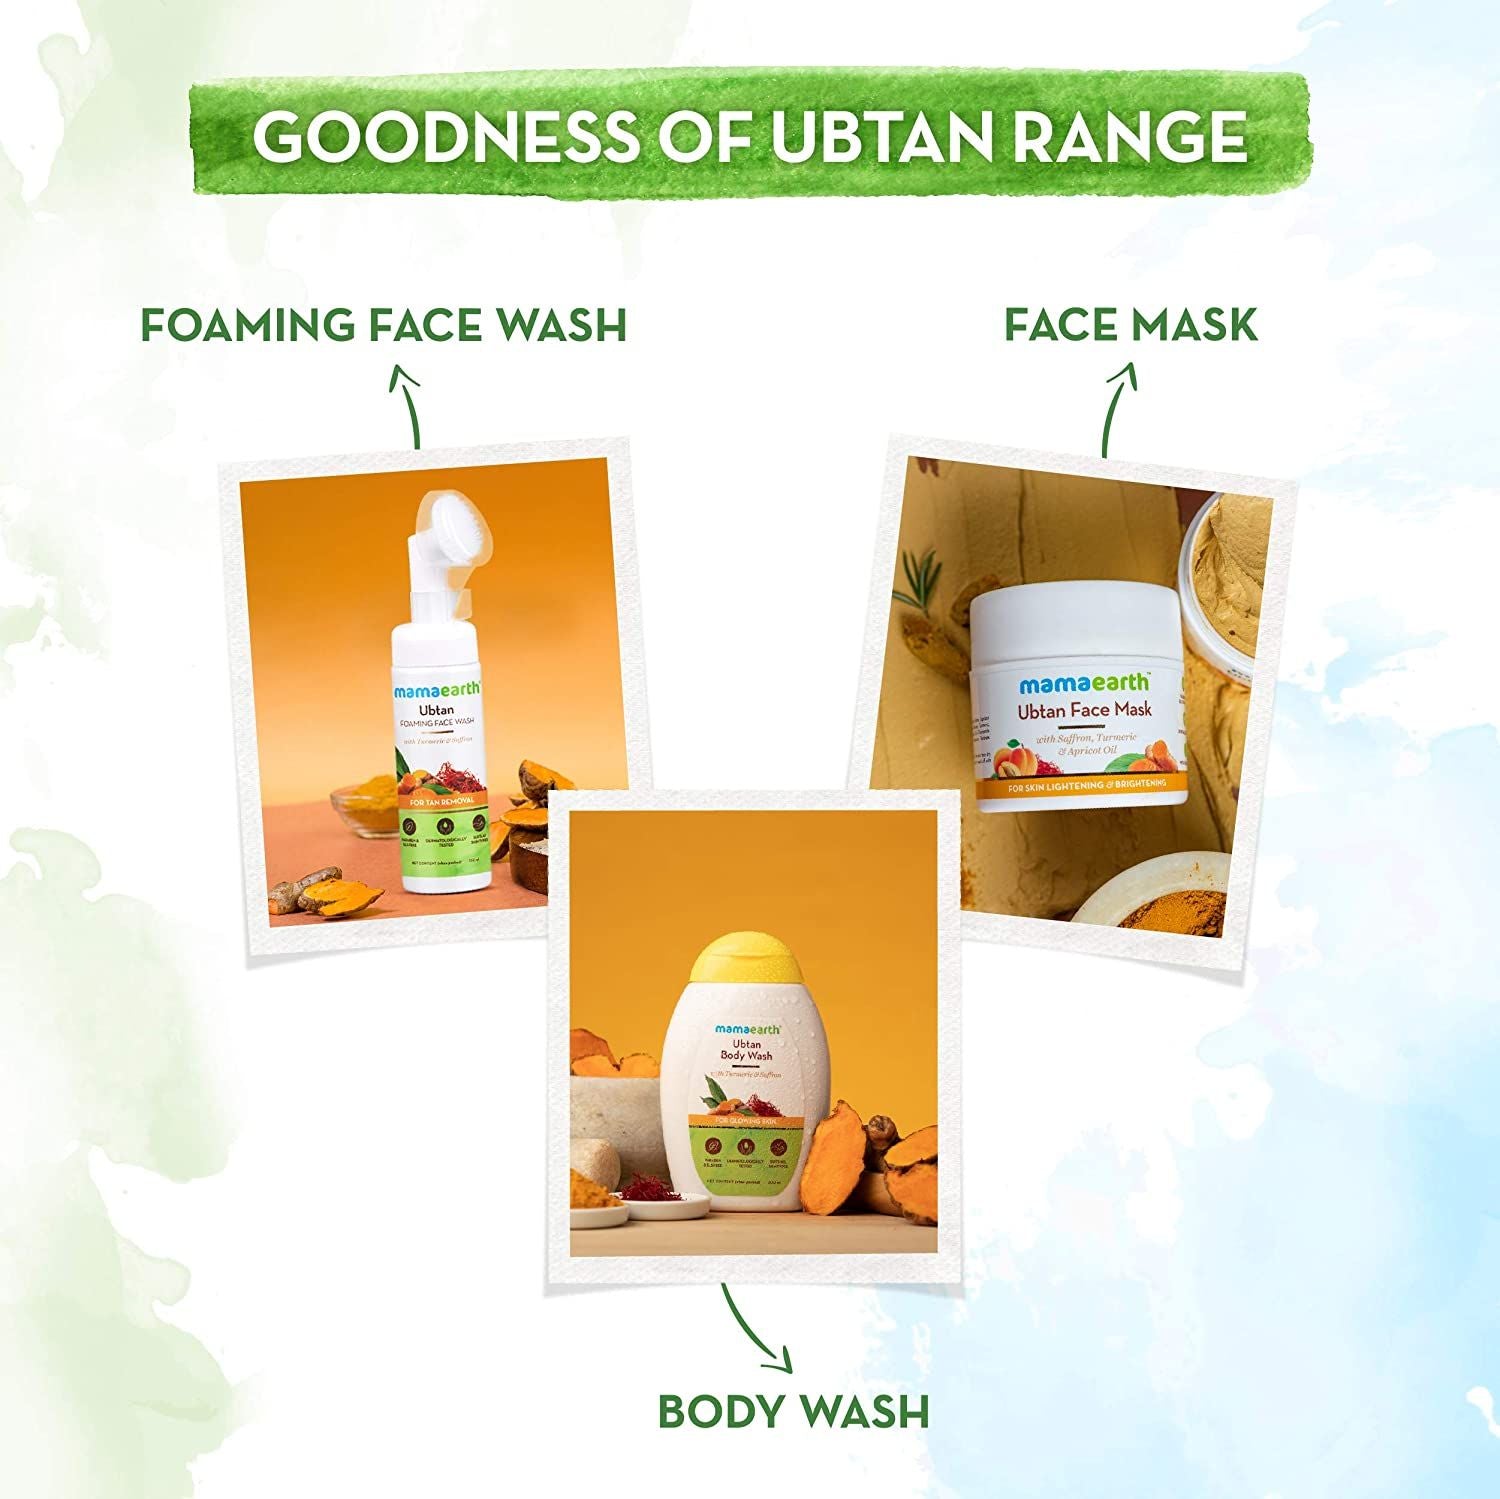 Ubtan Foaming Face Wash with Turmeric and Saffron for Tan Removal - 150ml